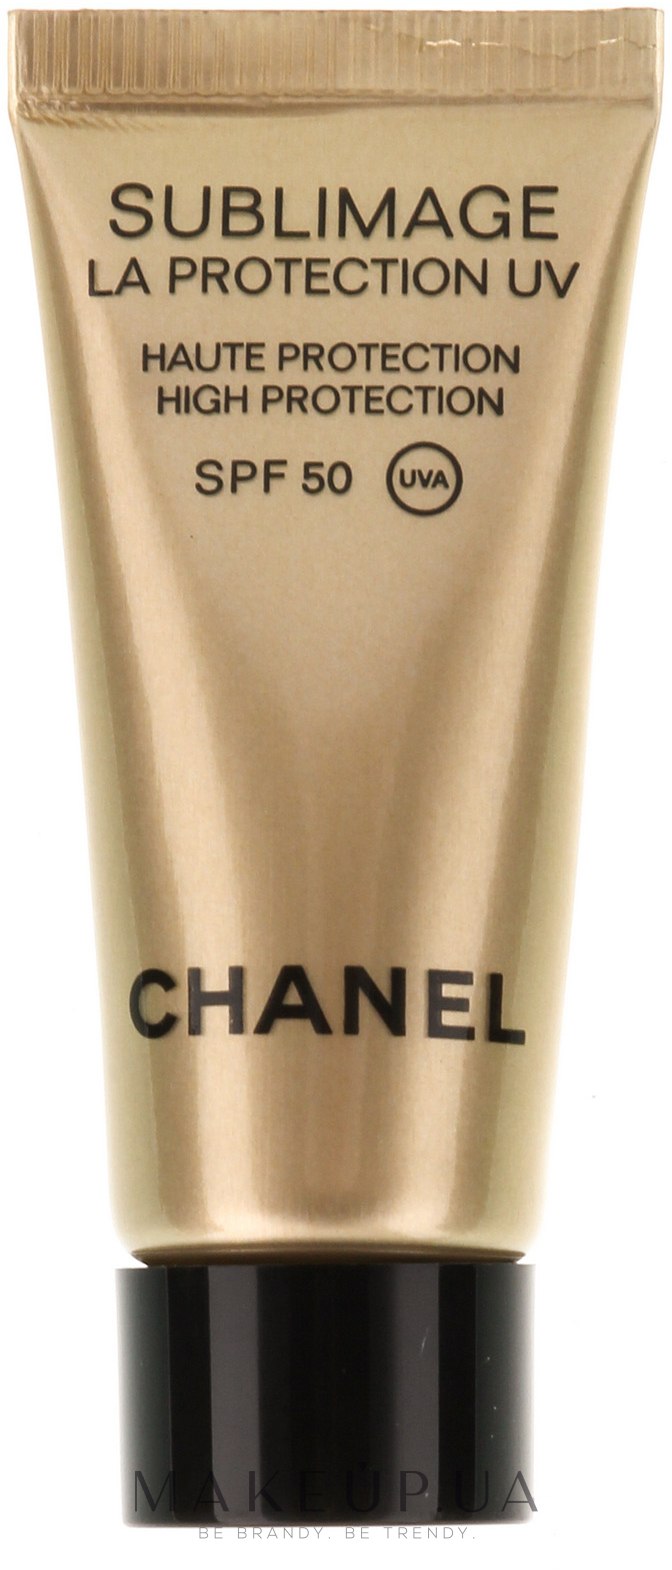 Chanel Sublimage La Protection Uv High Protection Spf 50 30ml  Amazonin  Health  Personal Care